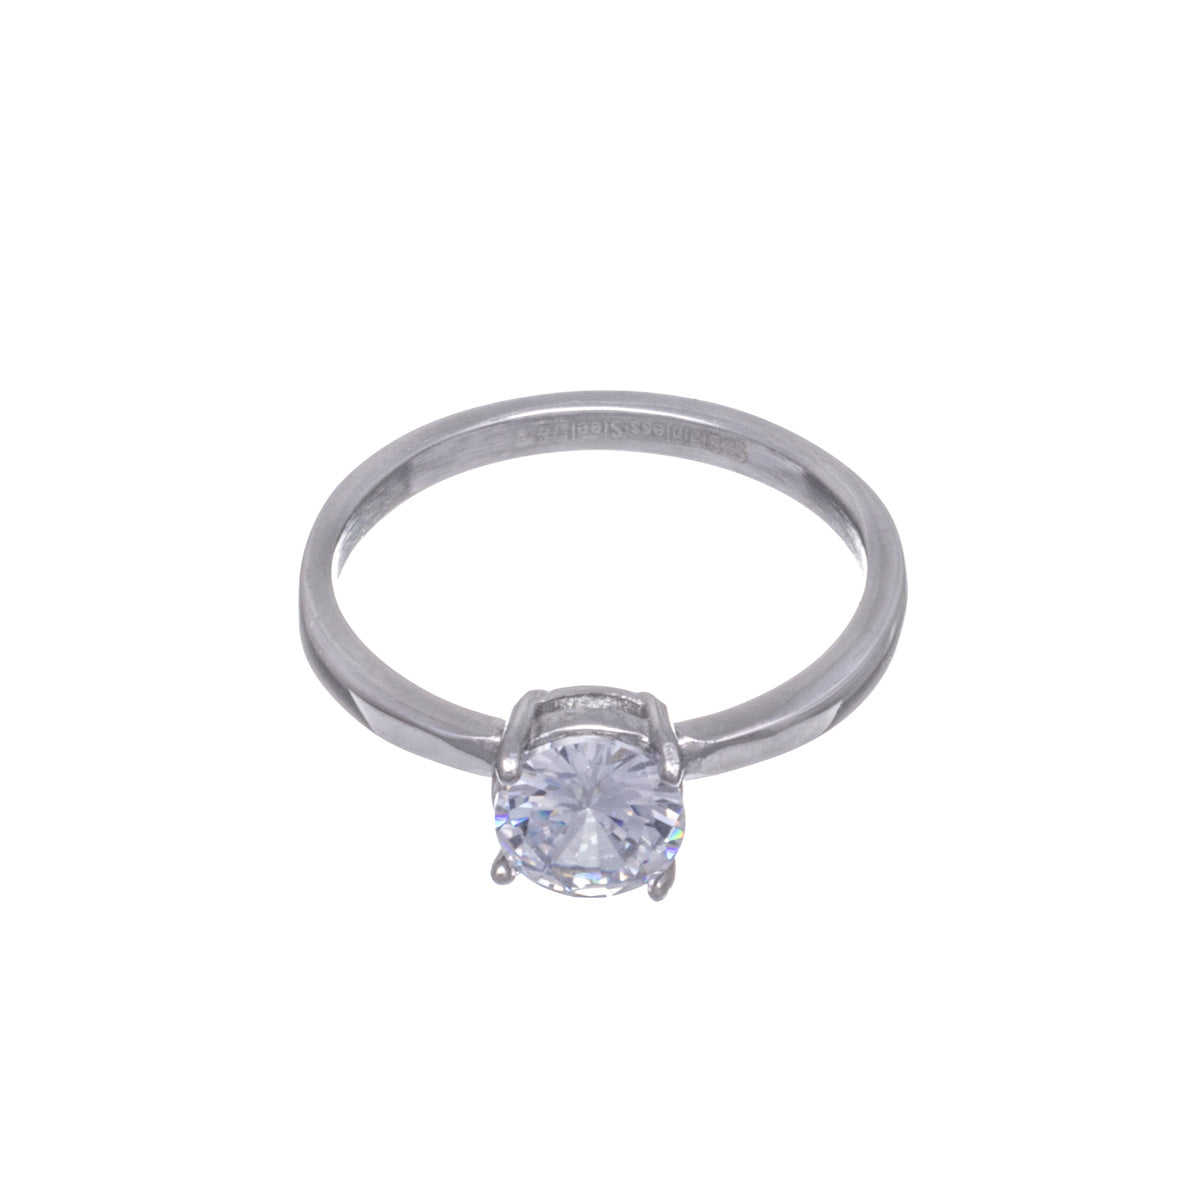 Ring with one zirconia stone steel ring (Steel 316L)